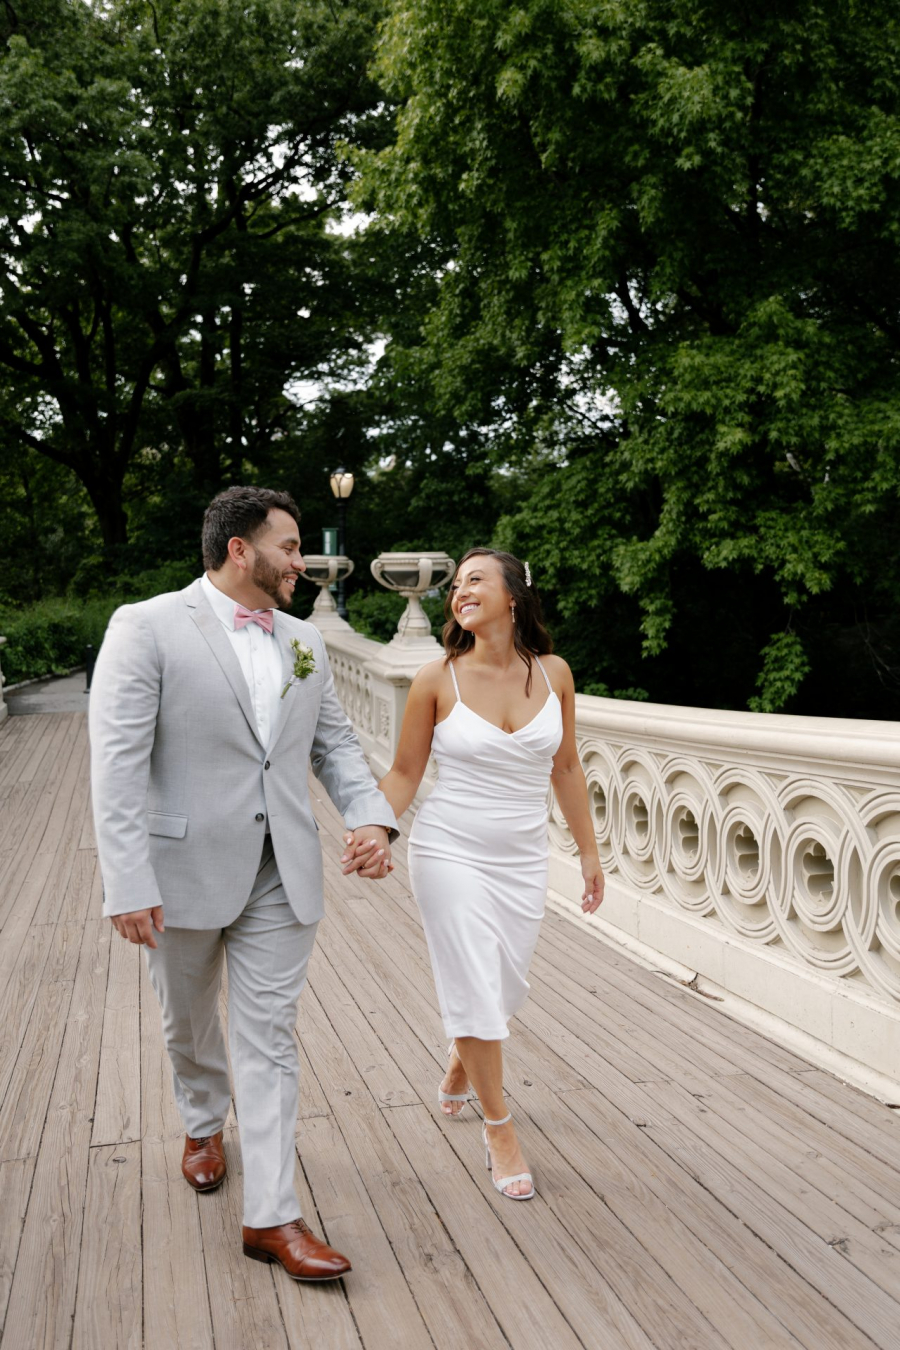 Simple wedding in Central Park NY 14